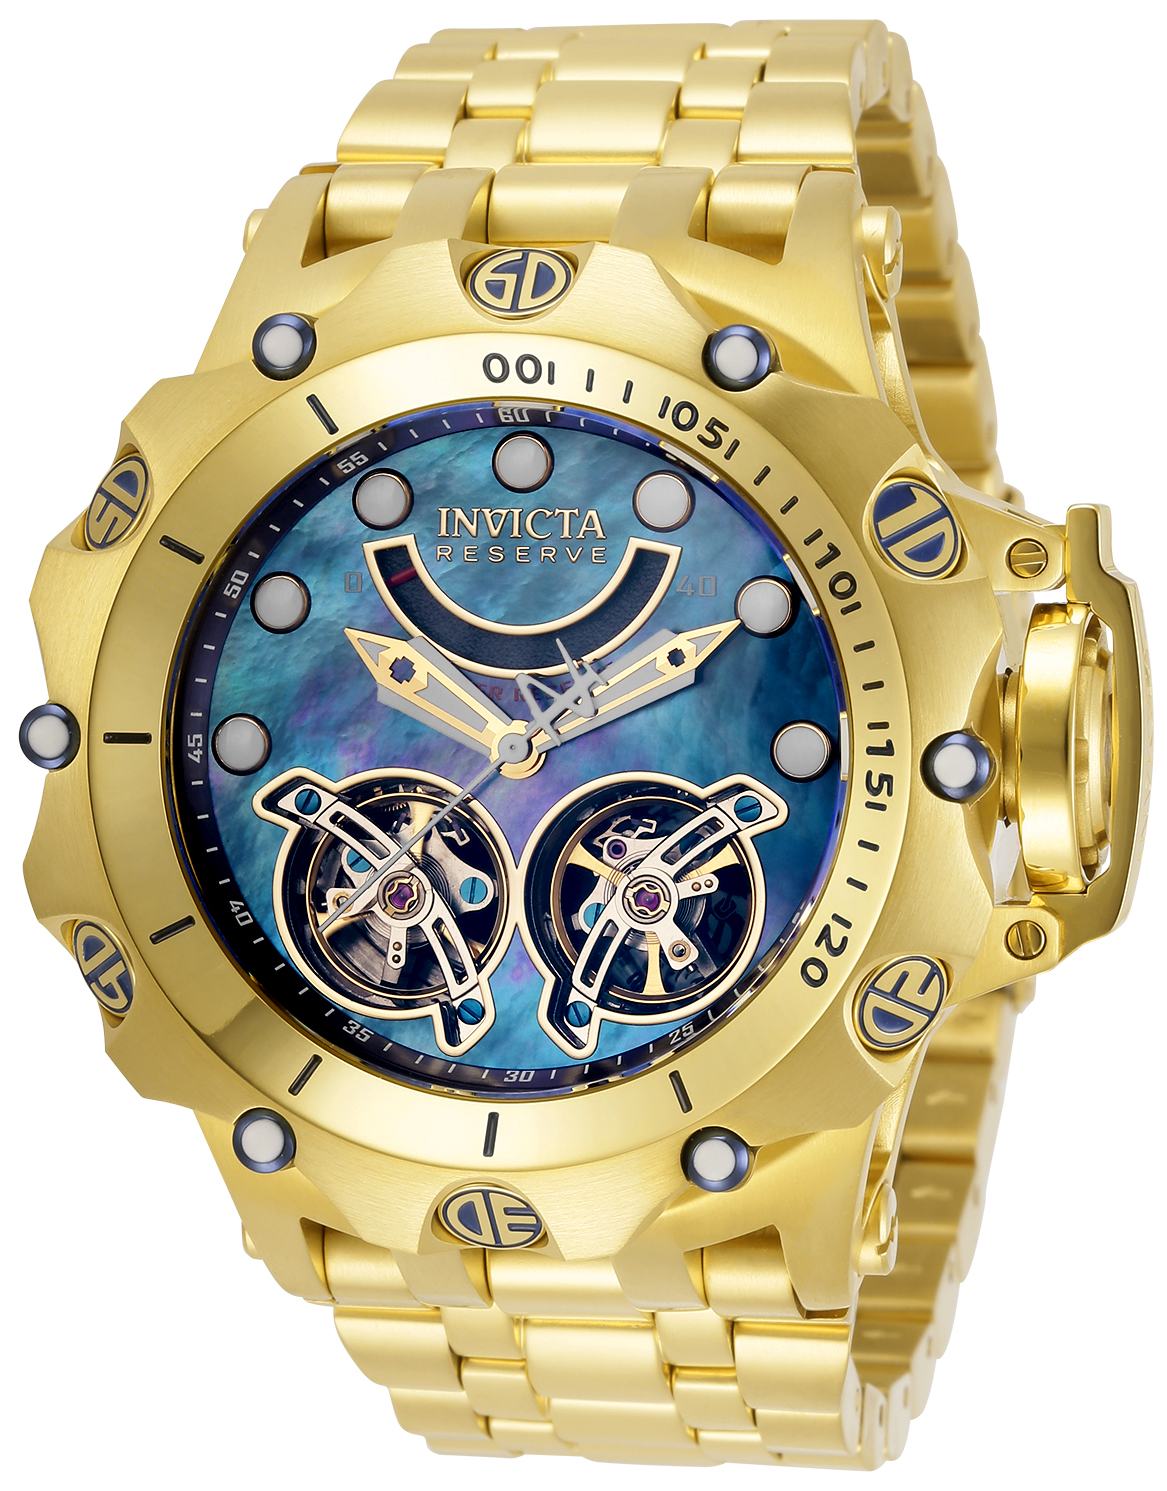 Invicta Reserve Venom Automatic Mens Watch - 51mm Stainless Steel Case, Stainless Steel Band, Gold (33550)